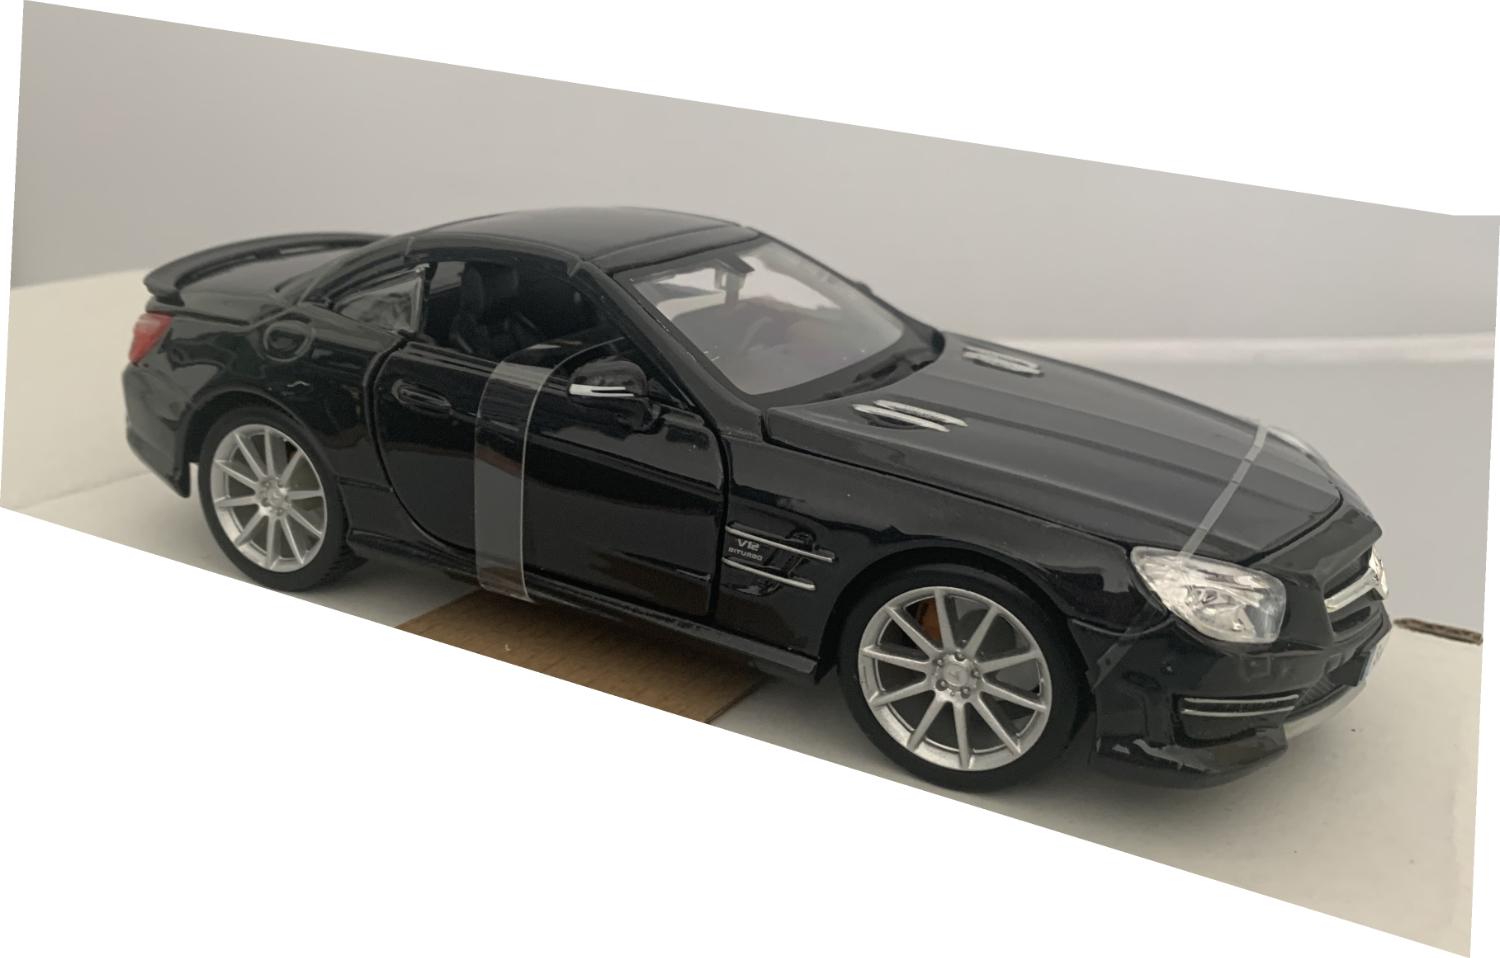 An excellent scale model of a Mercedes Benz SL 65 AMG decorated in black with rear spoiler and silver wheels.  Other trims are finished in chrome and silver.